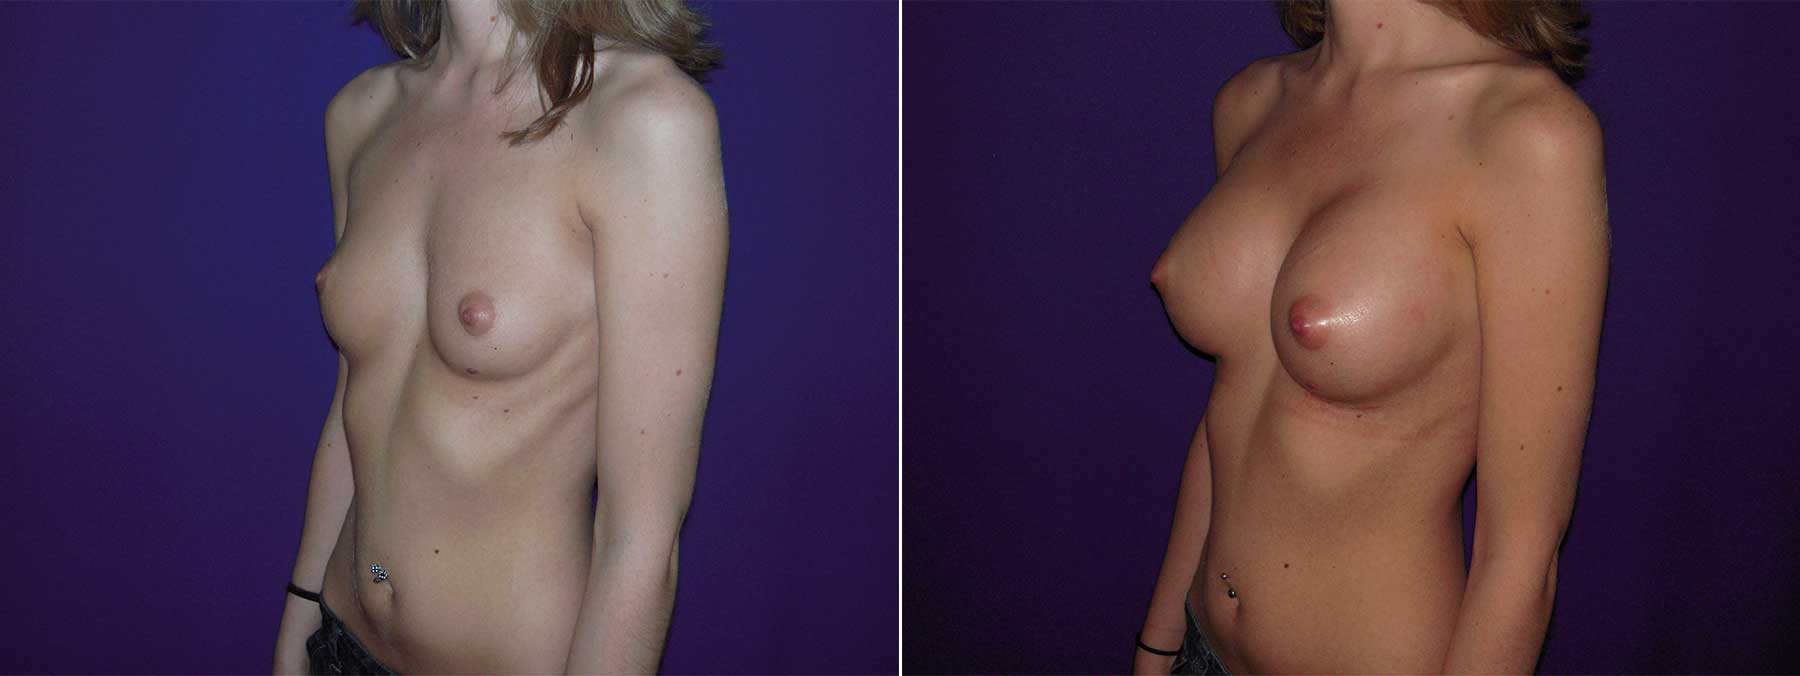 Before and After Image of Augmentation Mammoplasty